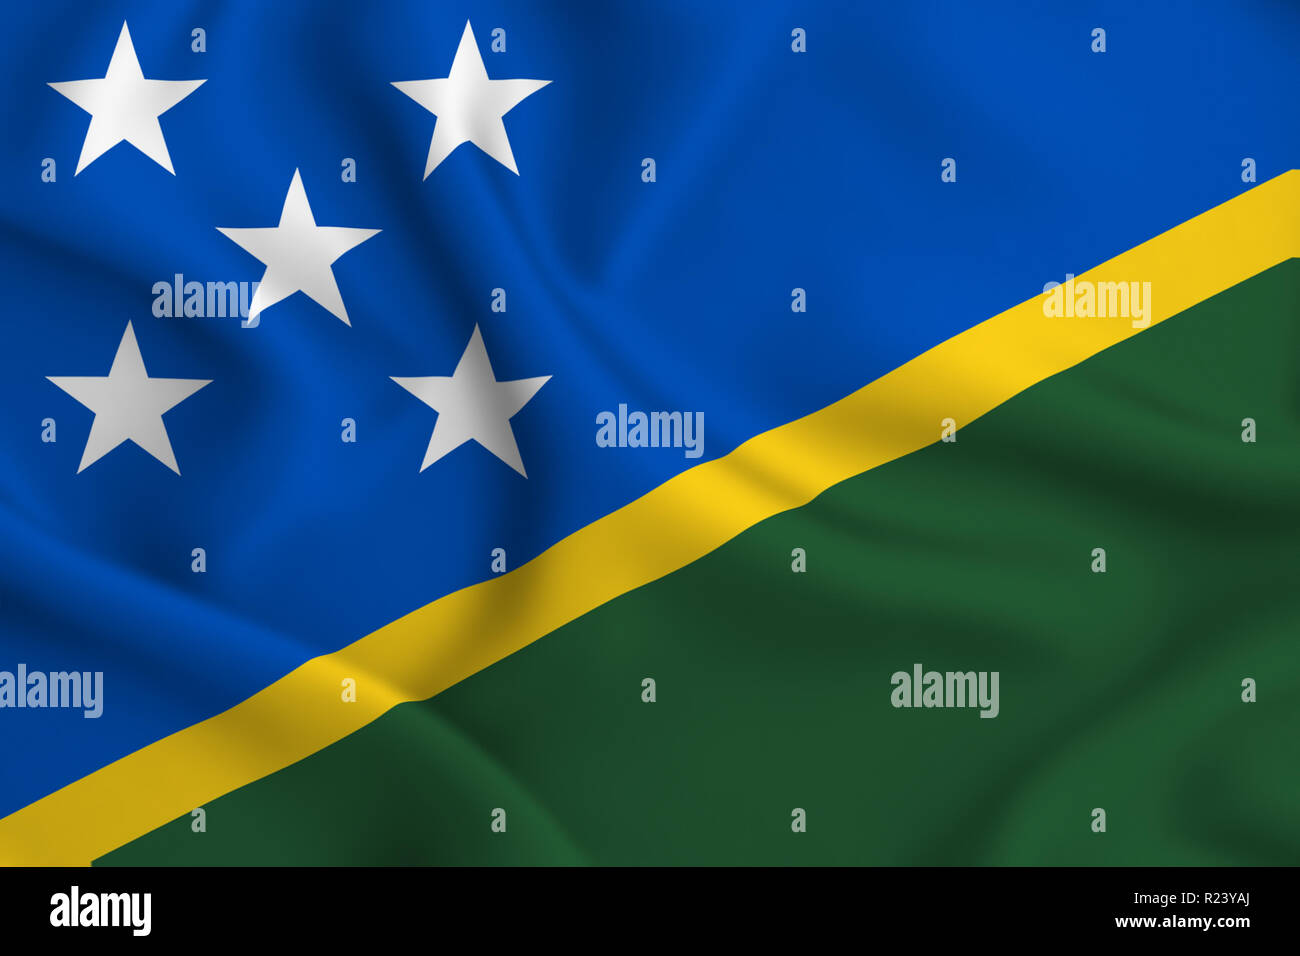 Salomon Islands 3D waving flag illustration. Texture can be used as background. Stock Photo